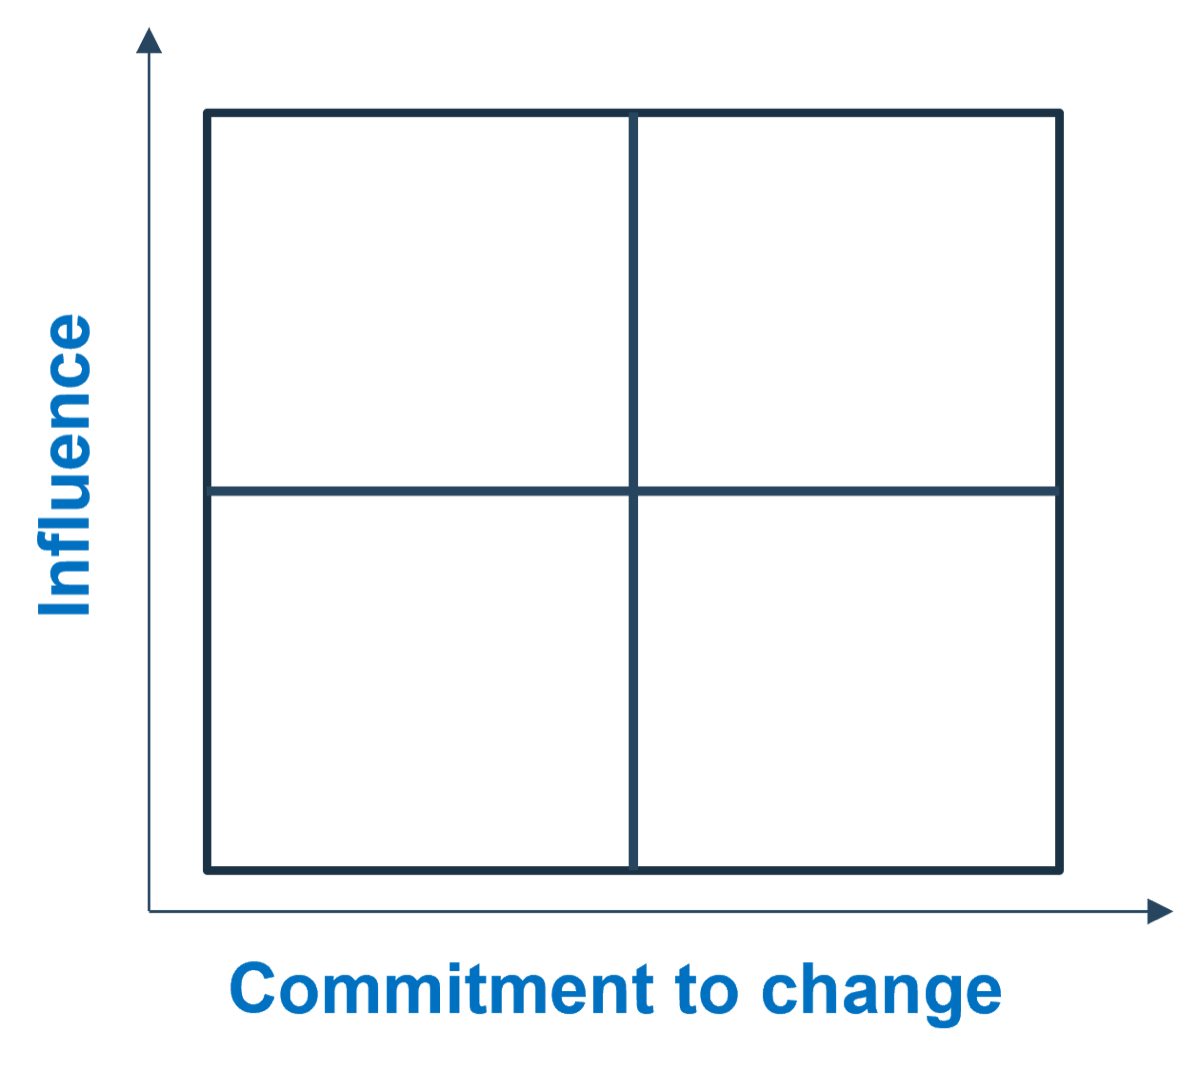 The image is a matrix, with Influence on the Y-axis and Commitment to change on the X-axis. It is a blank template.